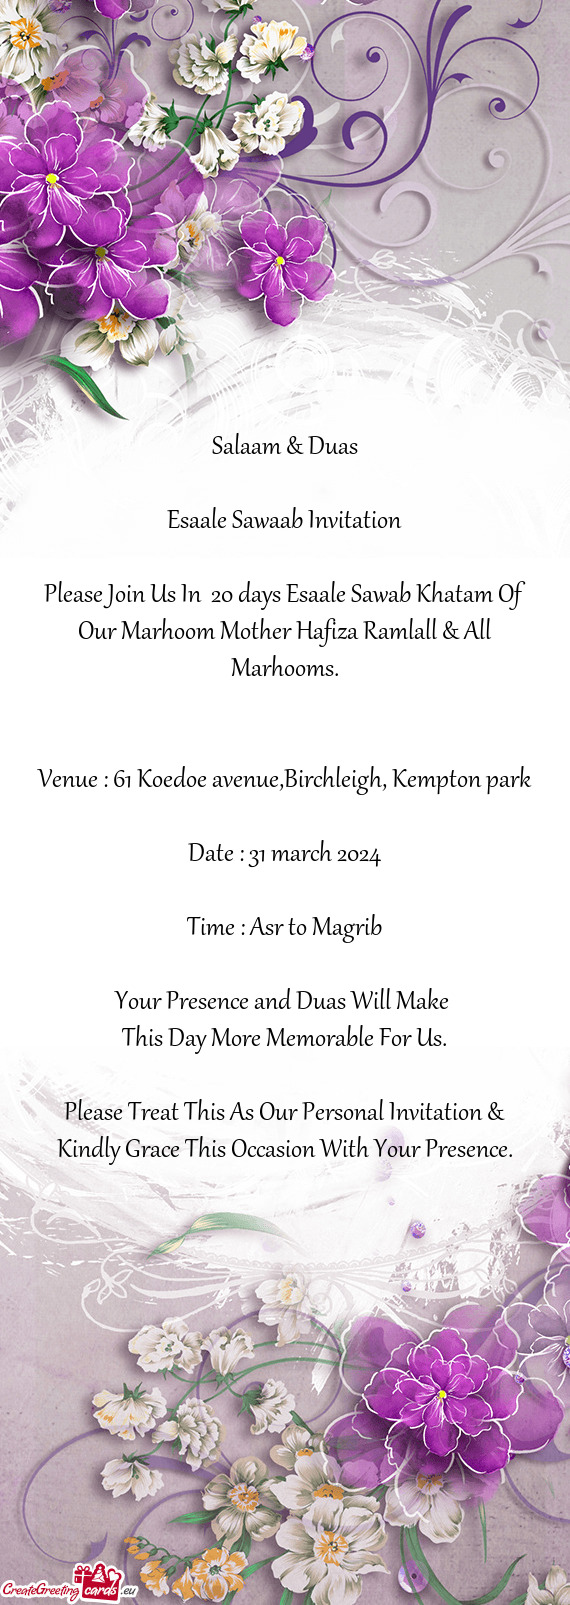 Please Join Us In 20 days Esaale Sawab Khatam Of Our Marhoom Mother Hafiza Ramlall & All Marhooms